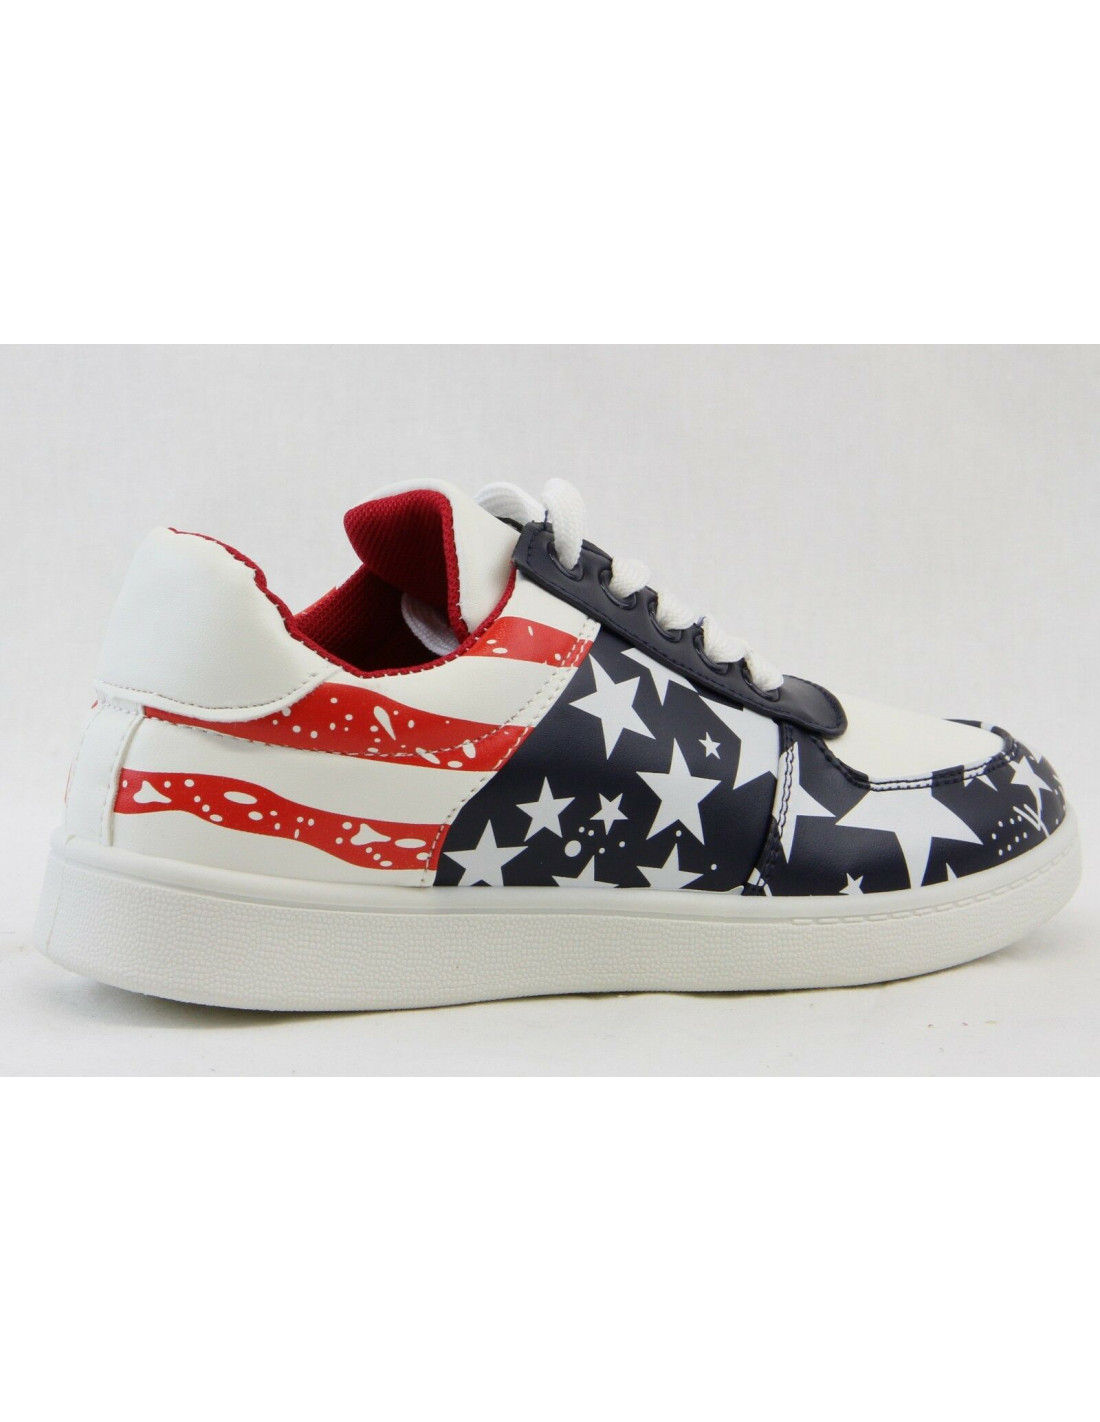 nkfbx Memorial Day American Flag Casual Flat Trainers for Women Walking